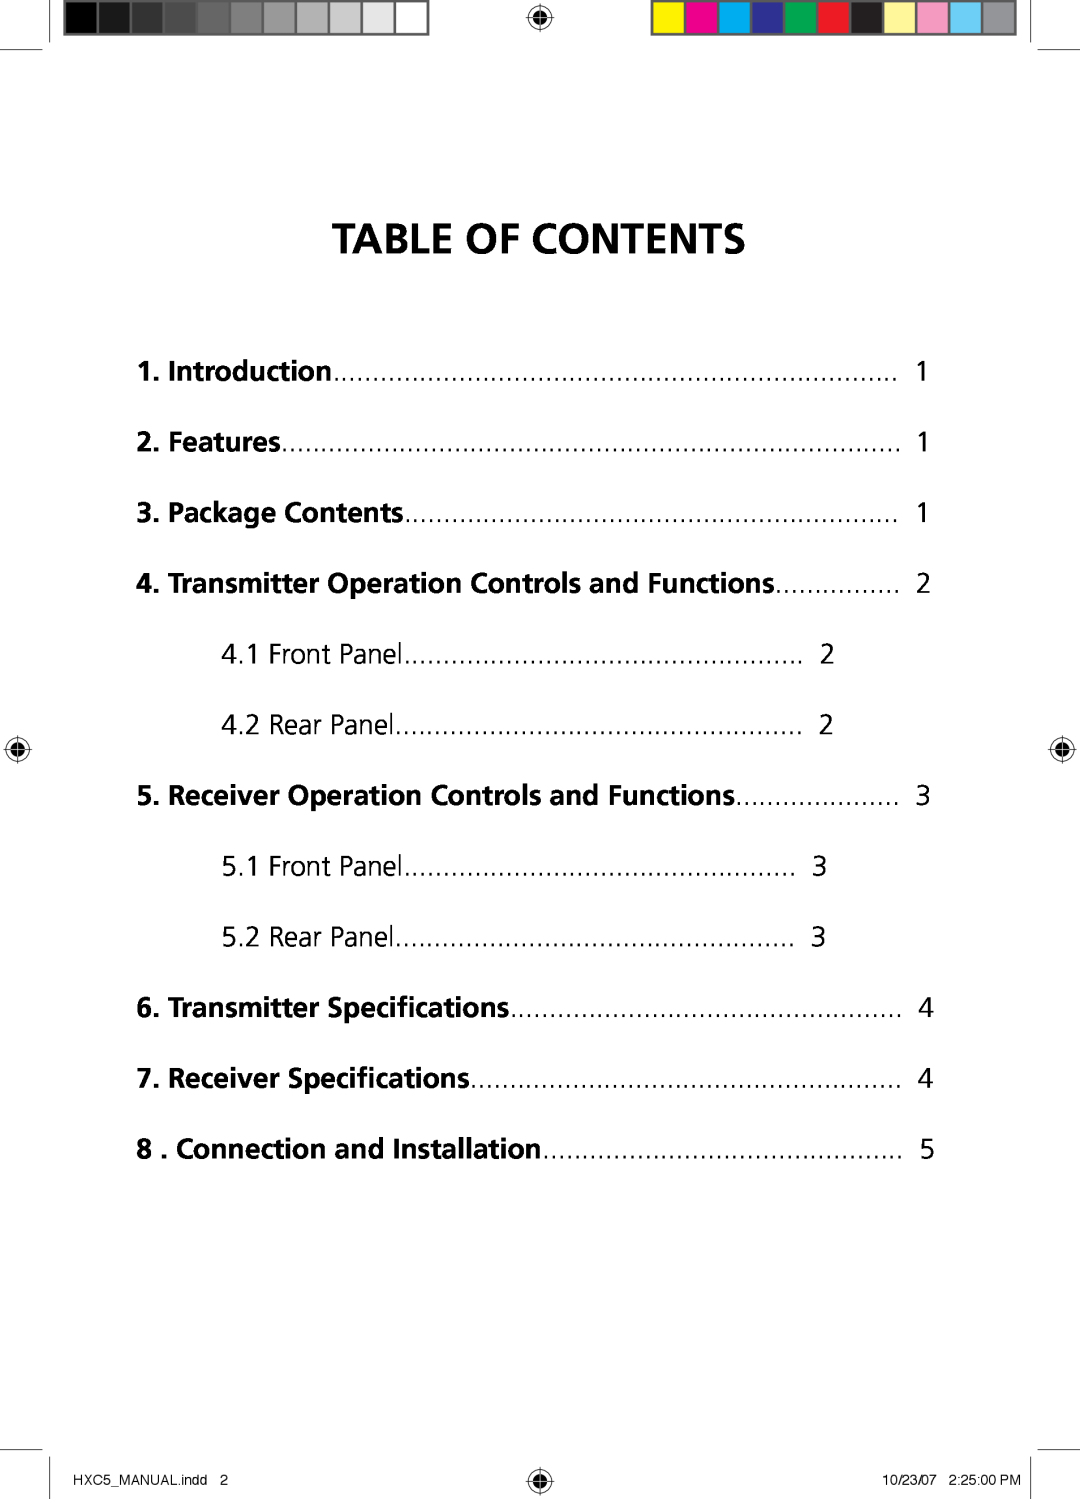 Tributaries HXC5 manual Table Of Contents, Front Panel, Rear Panel, Transmitter Operation Controls and Functions, Features 